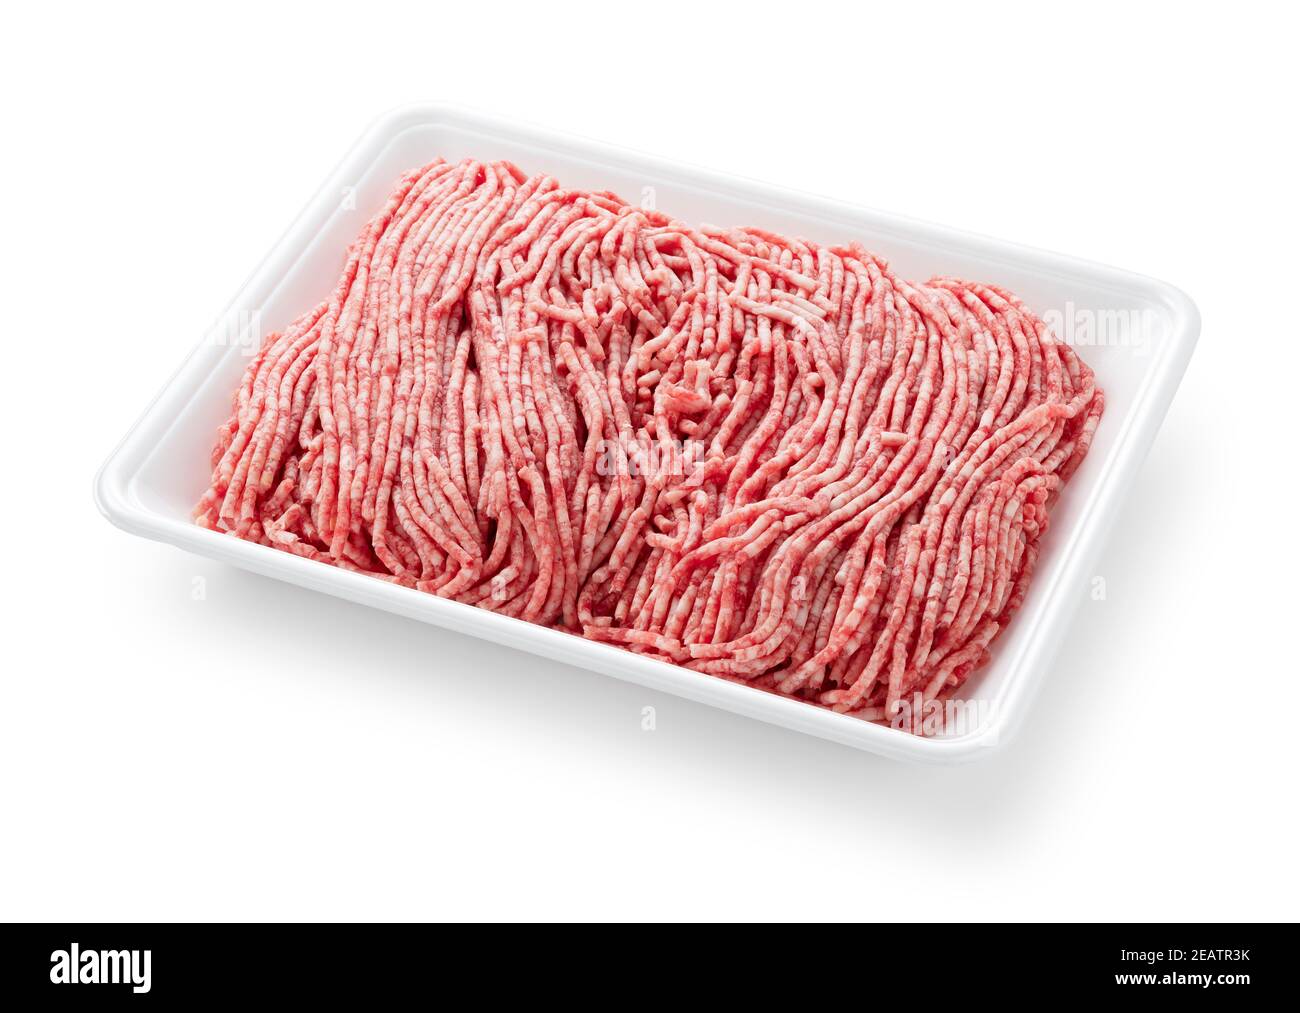 Minced meat in a food tray Stock Photo